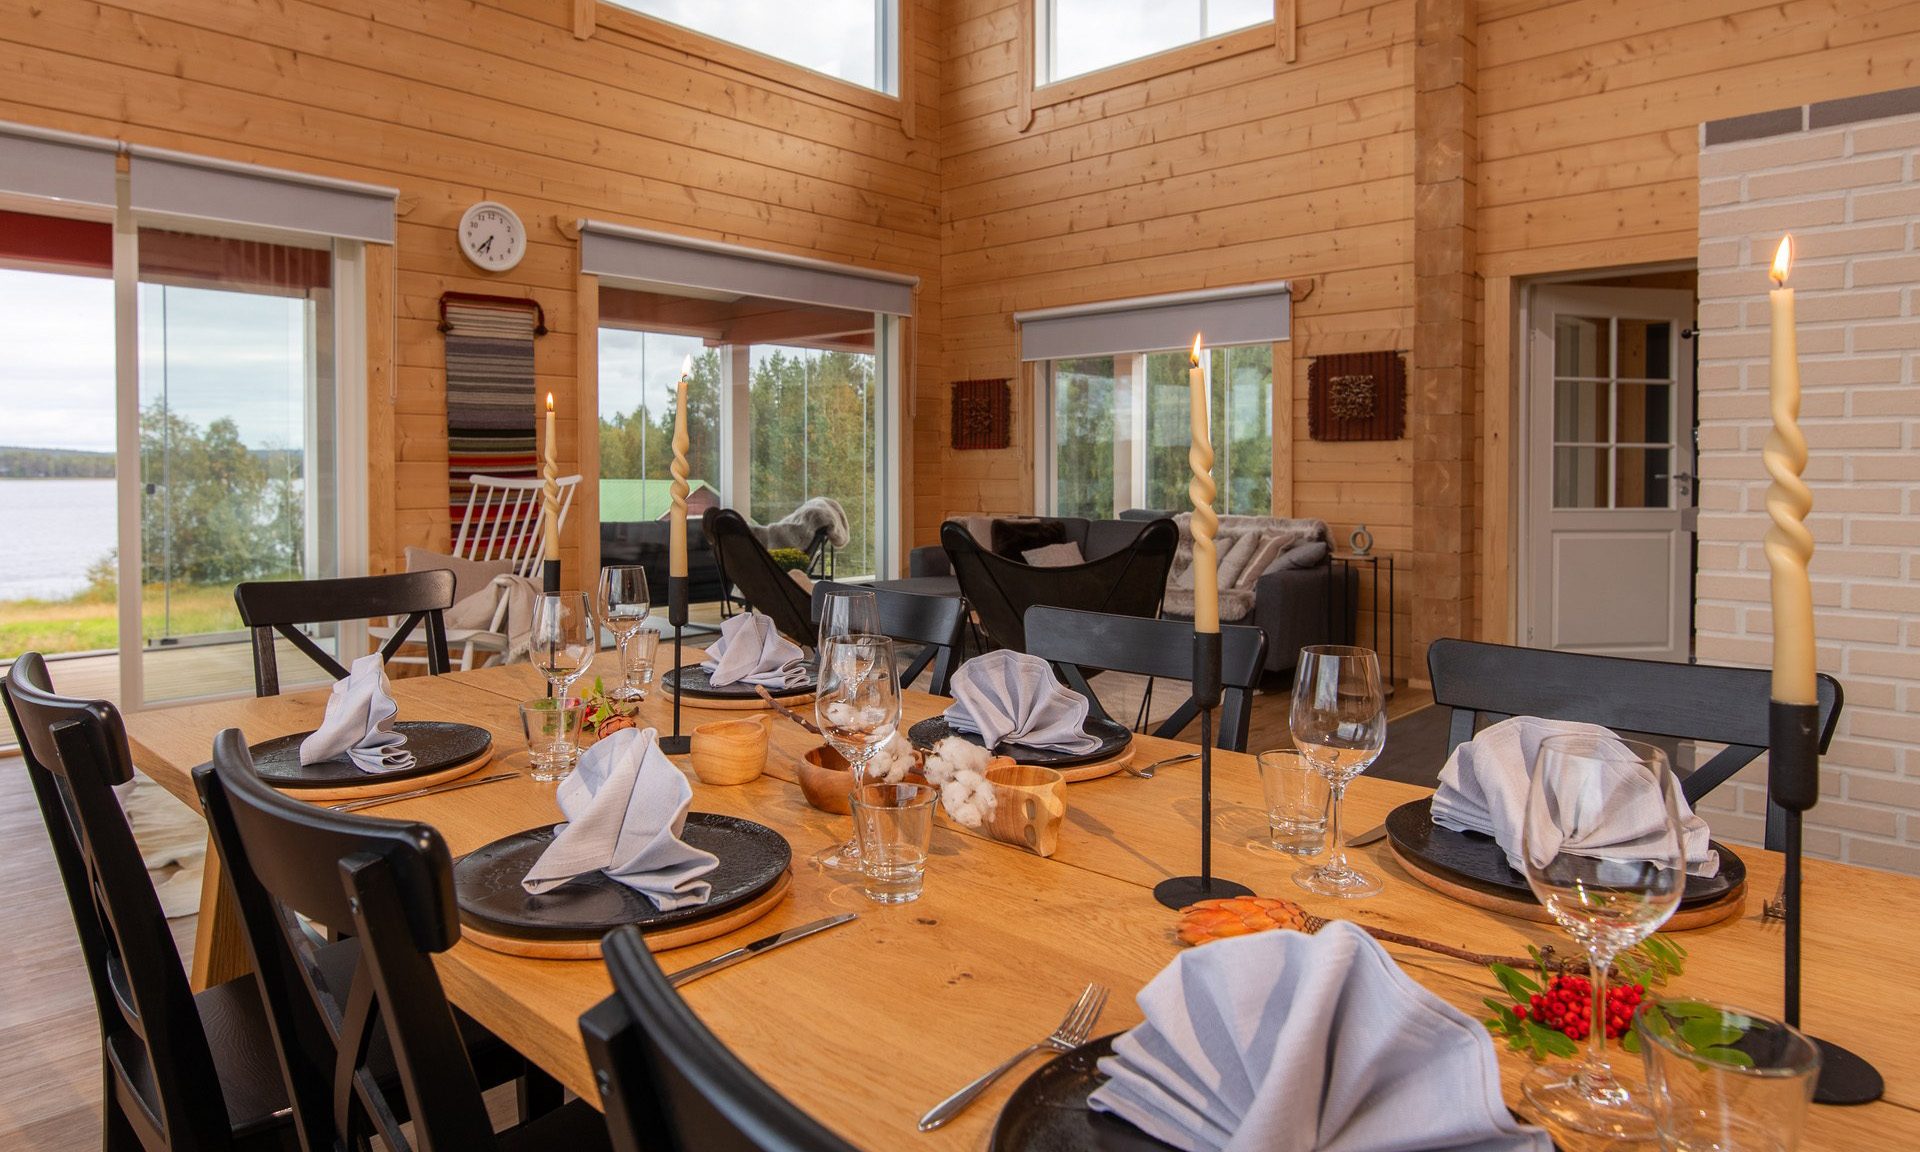 Luxurious Villa Traditionelle accommodates also larger families and groups byt he beautiful Lake in Lapland. | Lapland Luxury